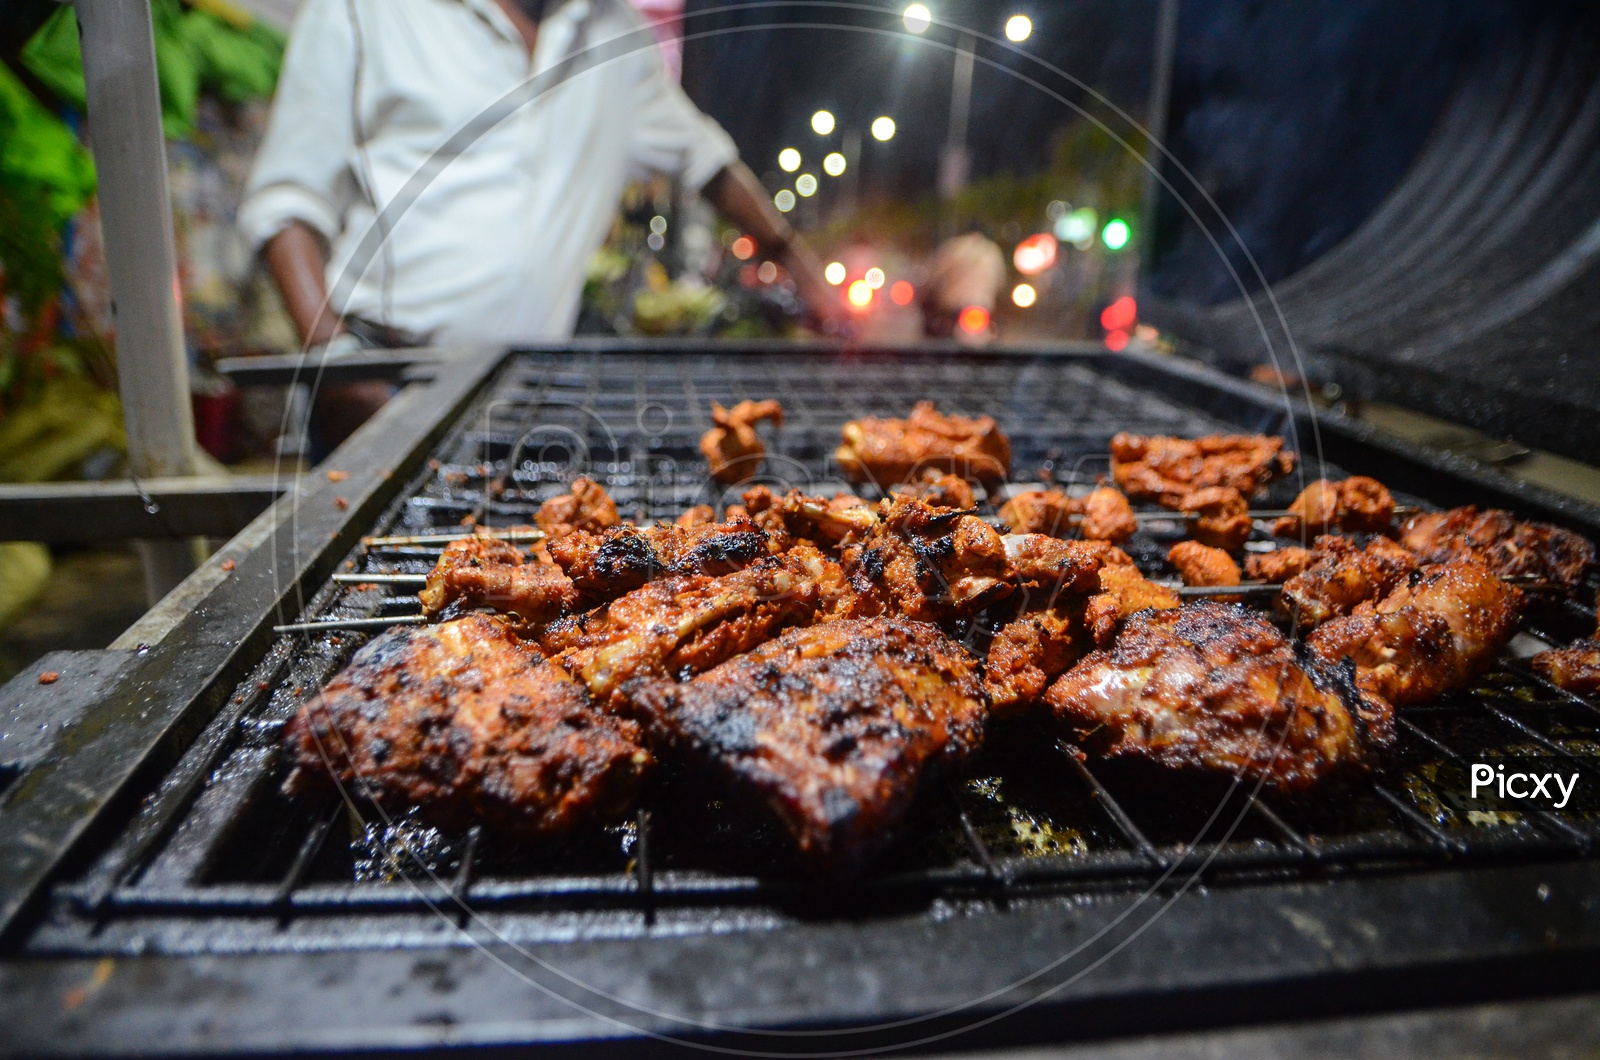 chicken barbecue, street food